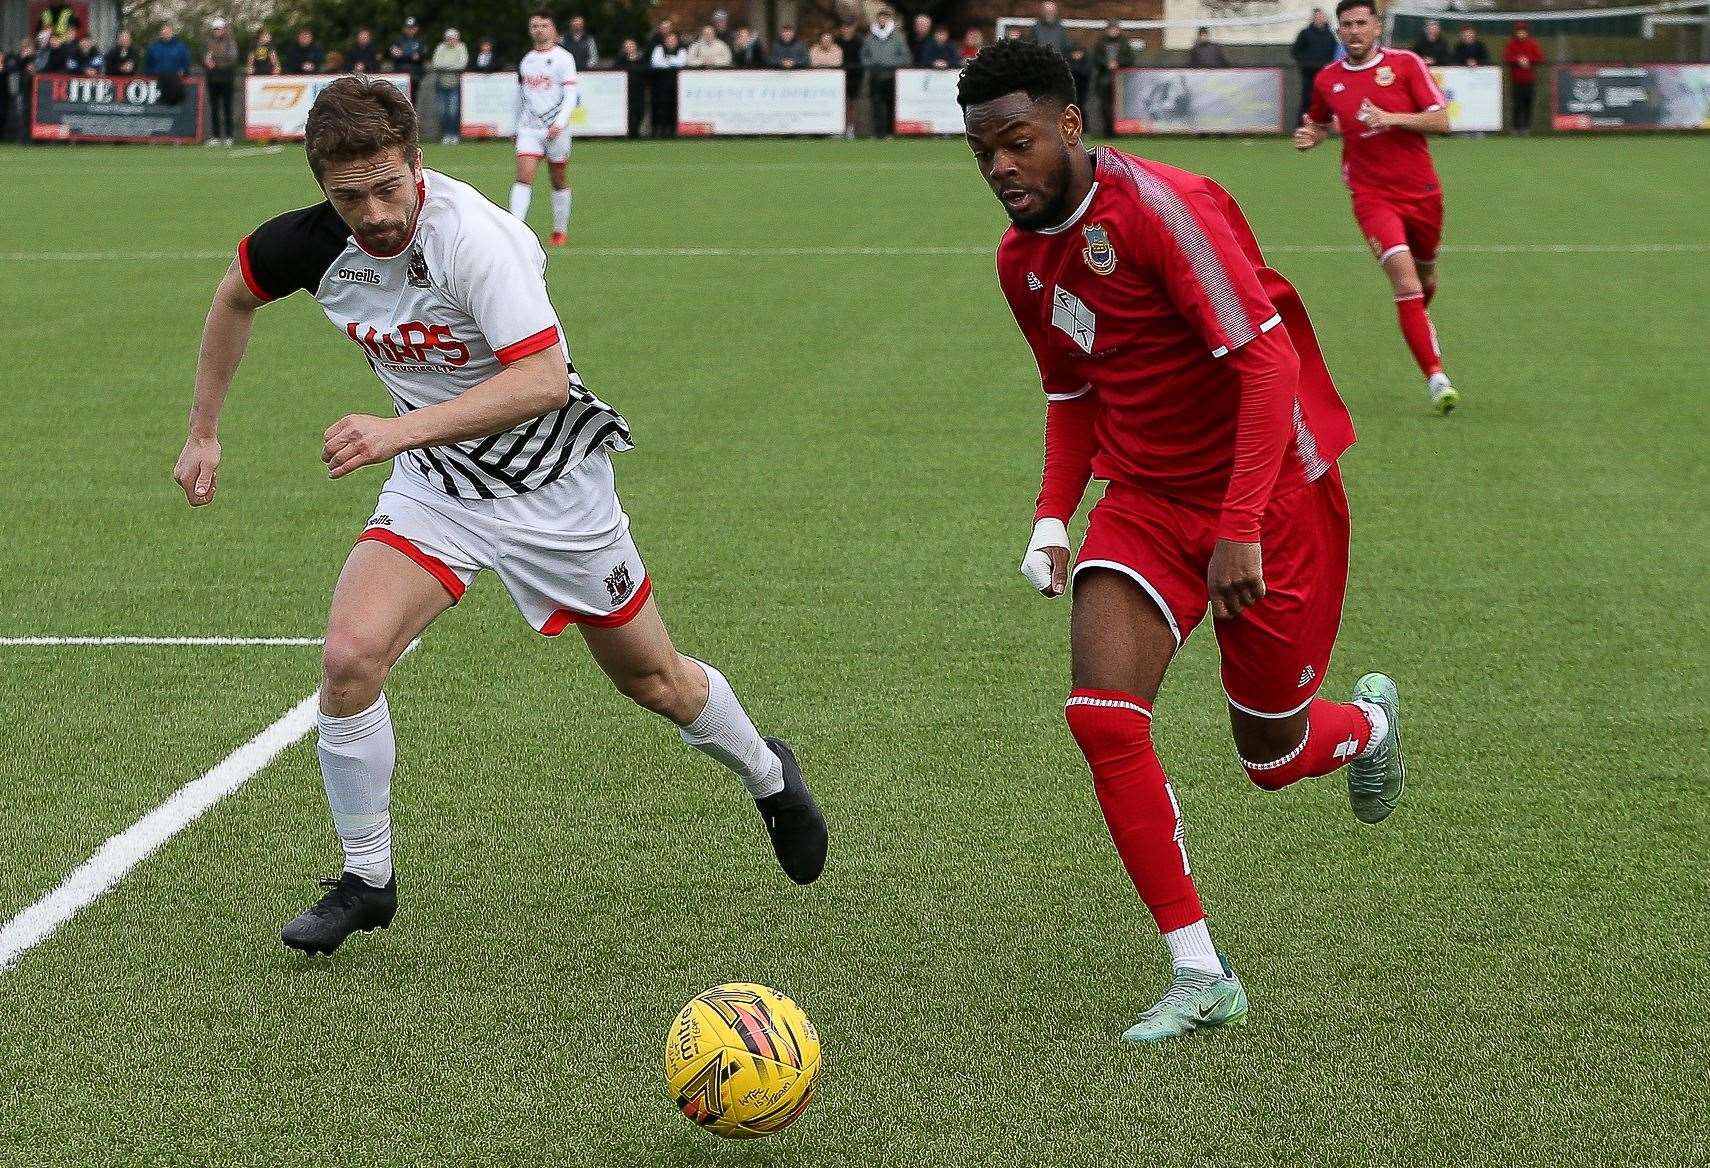 Josh Williams - is set to move on for a higher-division club after a productive season at Whitstable. Picture: Les Biggs